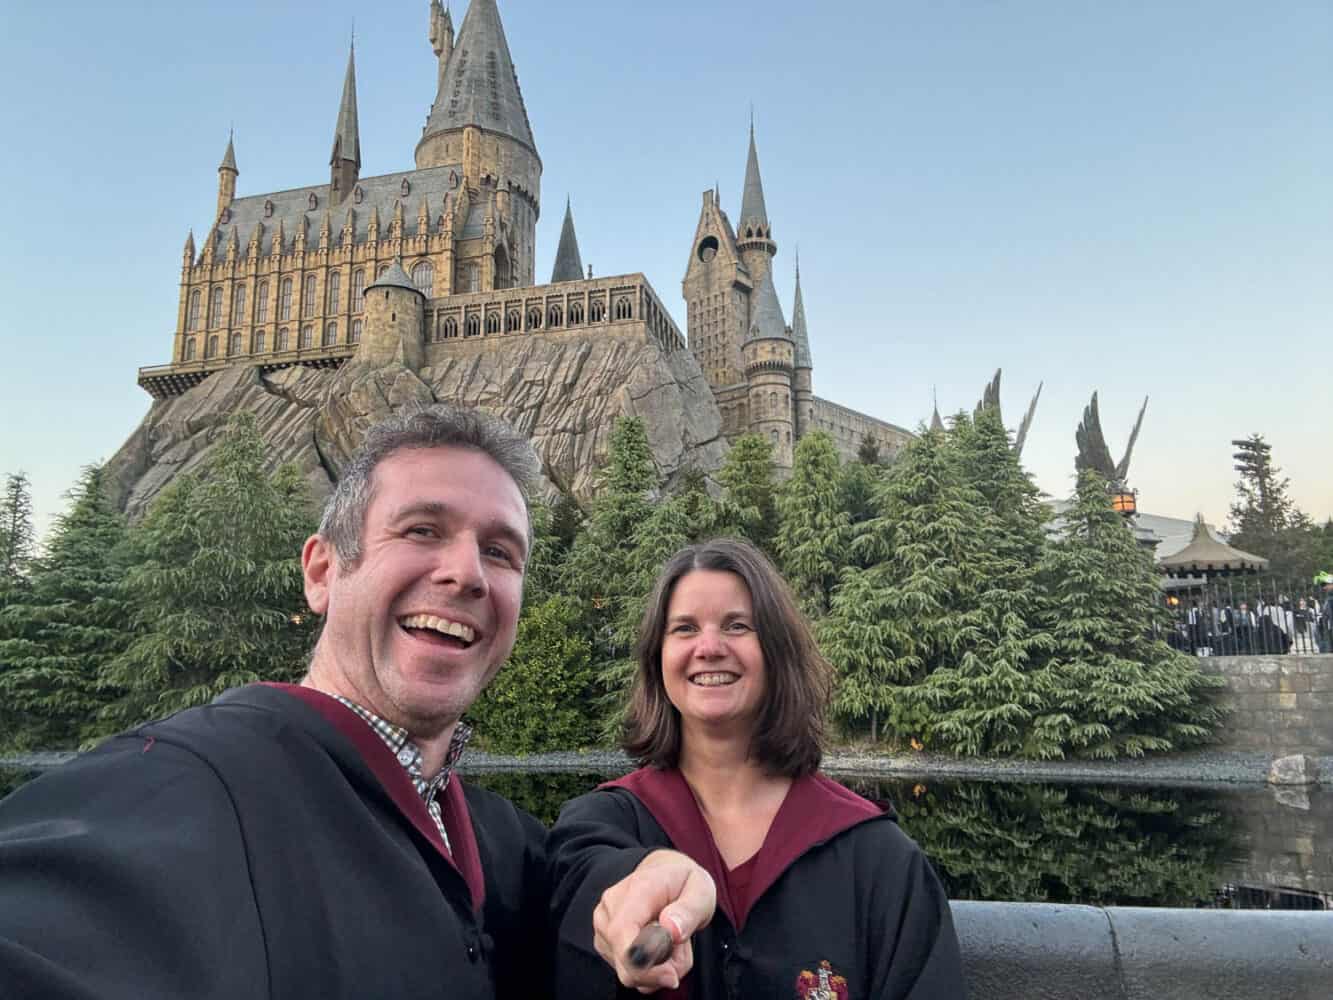 Simon and Erin with gowns and wands outside Hogwarts in Universal Studios Japan